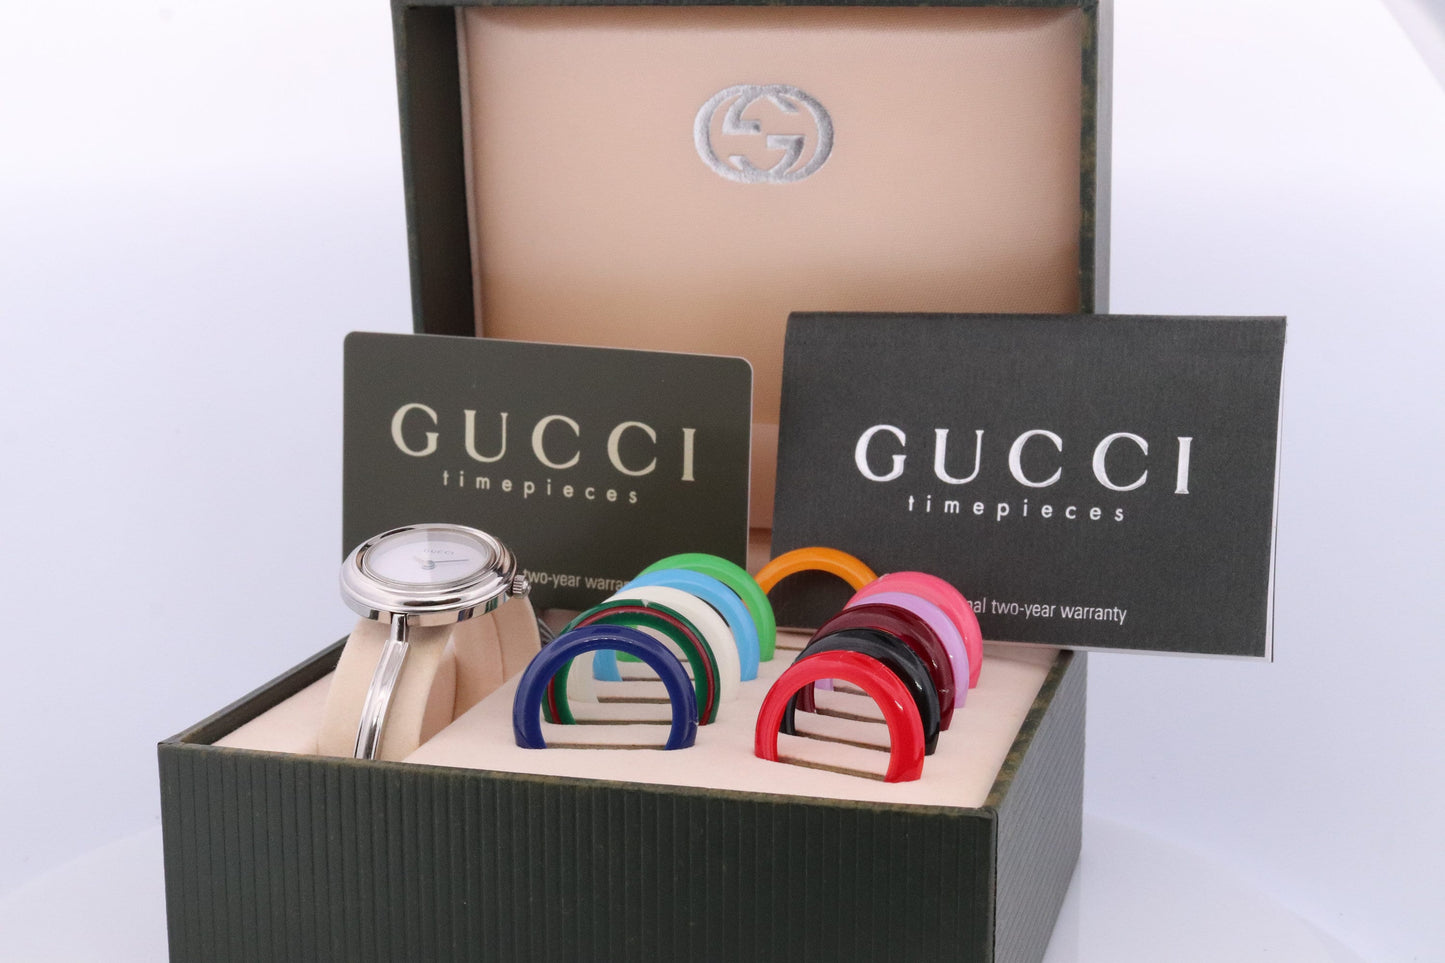 Genuine GUCCI 11/12.2 Watch. Vintage Ladies Gucci Silver Change Bangle Bezel Watch. Box and papers